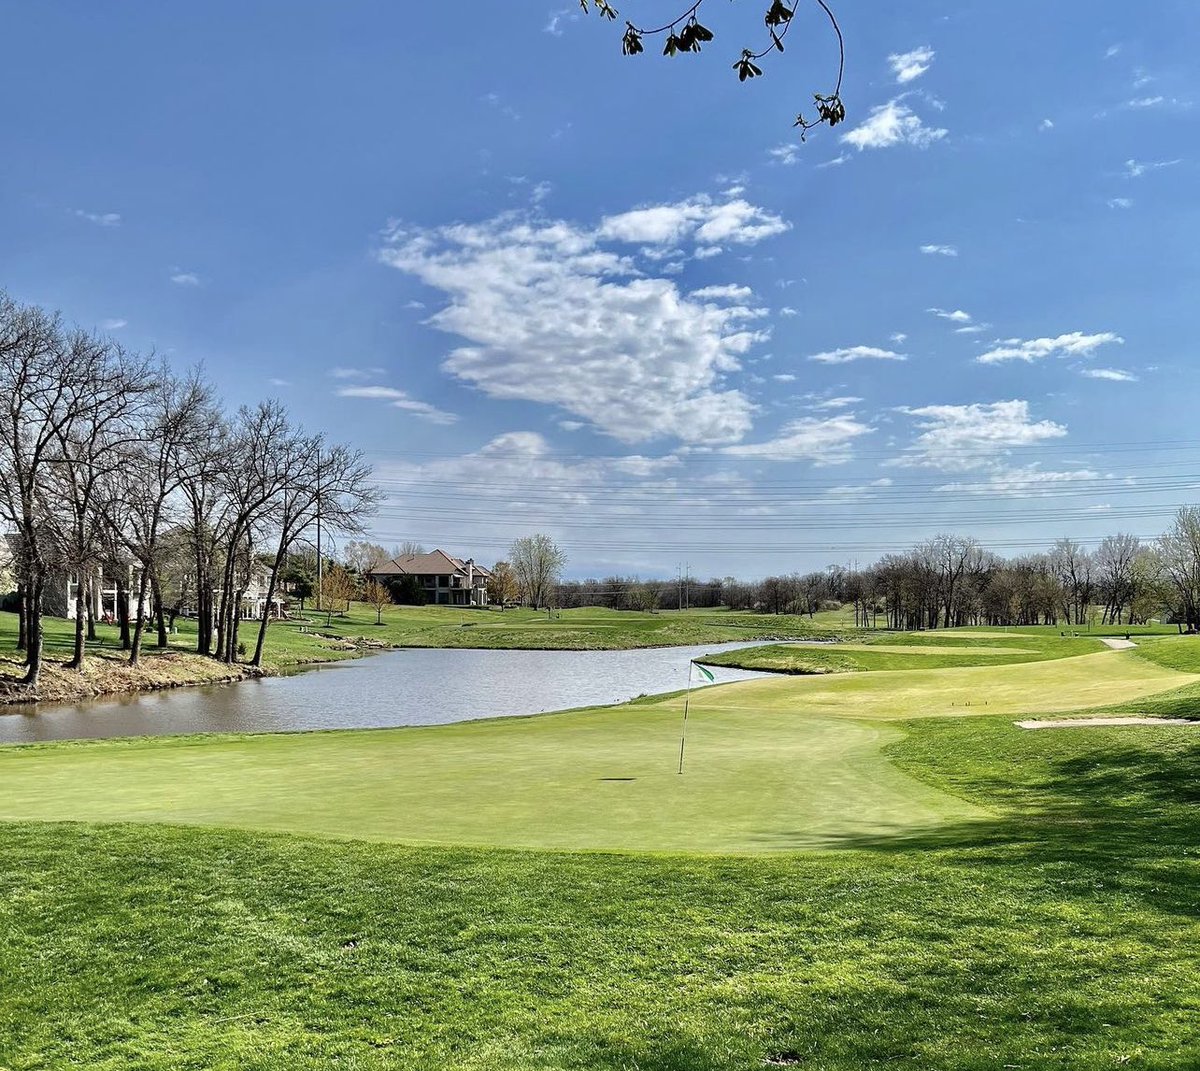 🚨NJCAA Central District Championship Live Scoring Link ⬇️!!
🏴‍☠️⛳️ #SailsUp 

1st and 2nd Rounds ➡️ April 29th
Final Round ➡️ April 30th

⏰ ➡️ 8:45am Shotgun Start Both Days

📊 results.golfstat.com/public/leaderb…